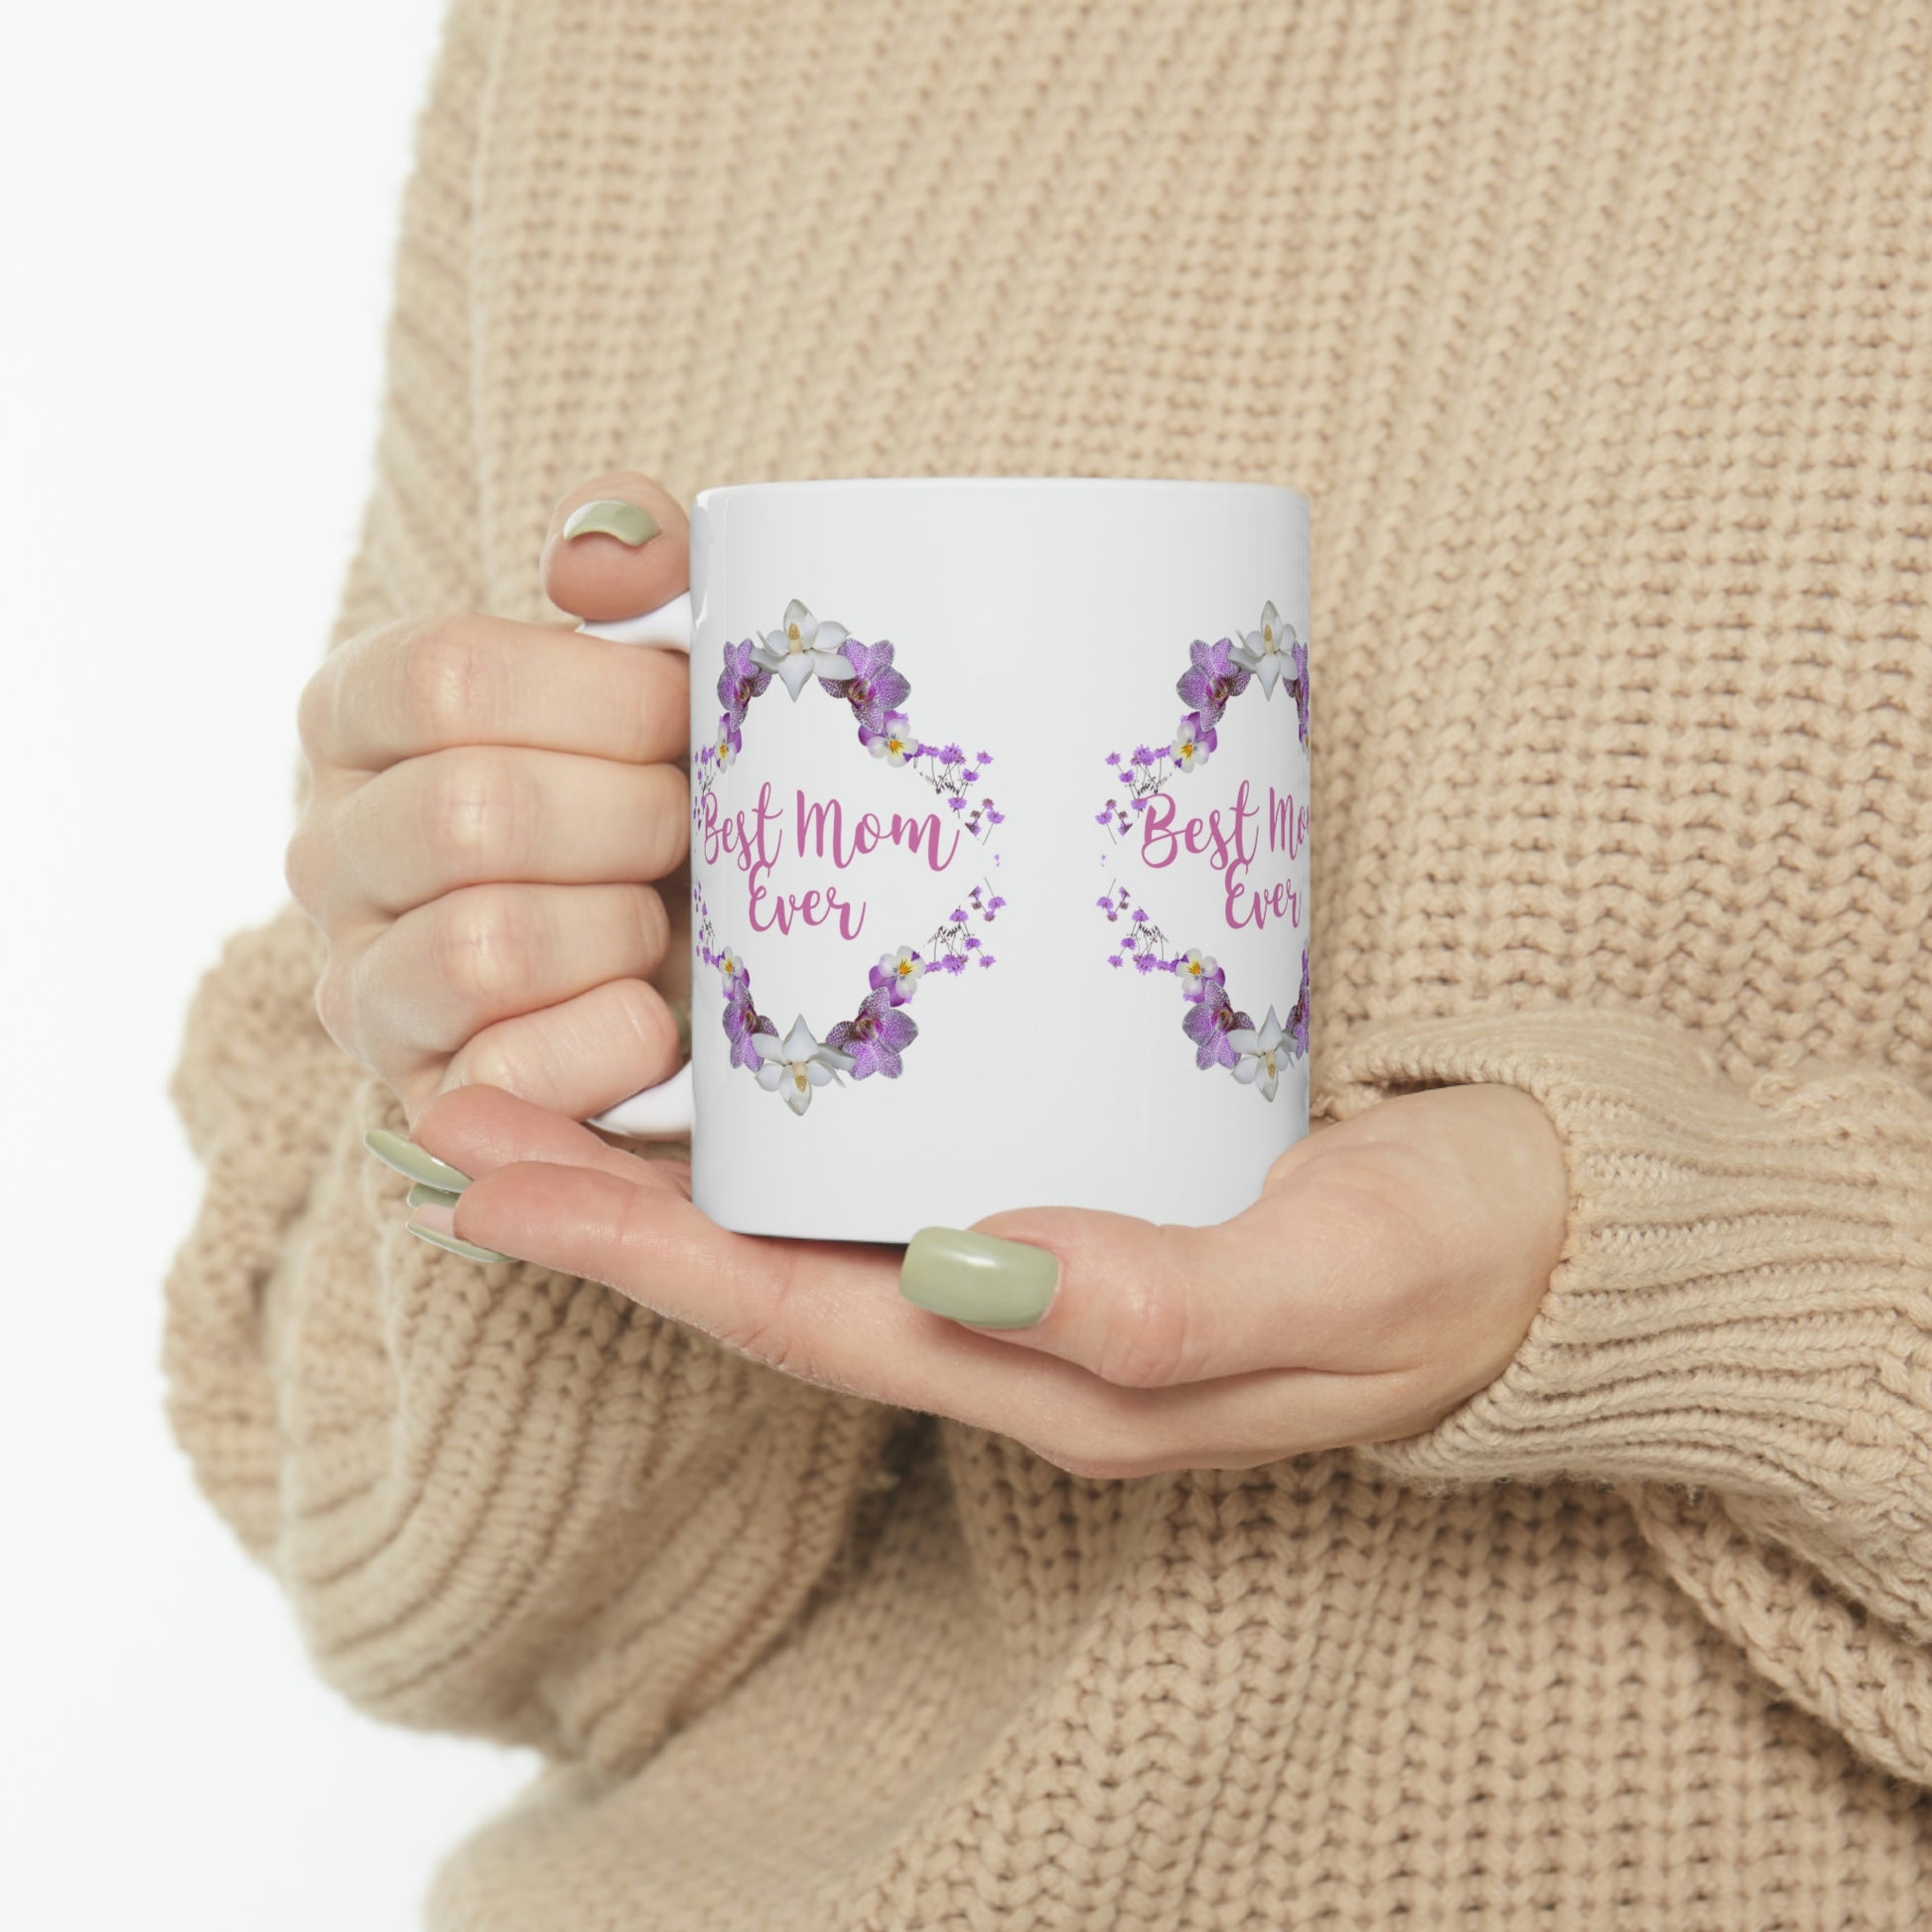 Mock up of a woman holding the mug